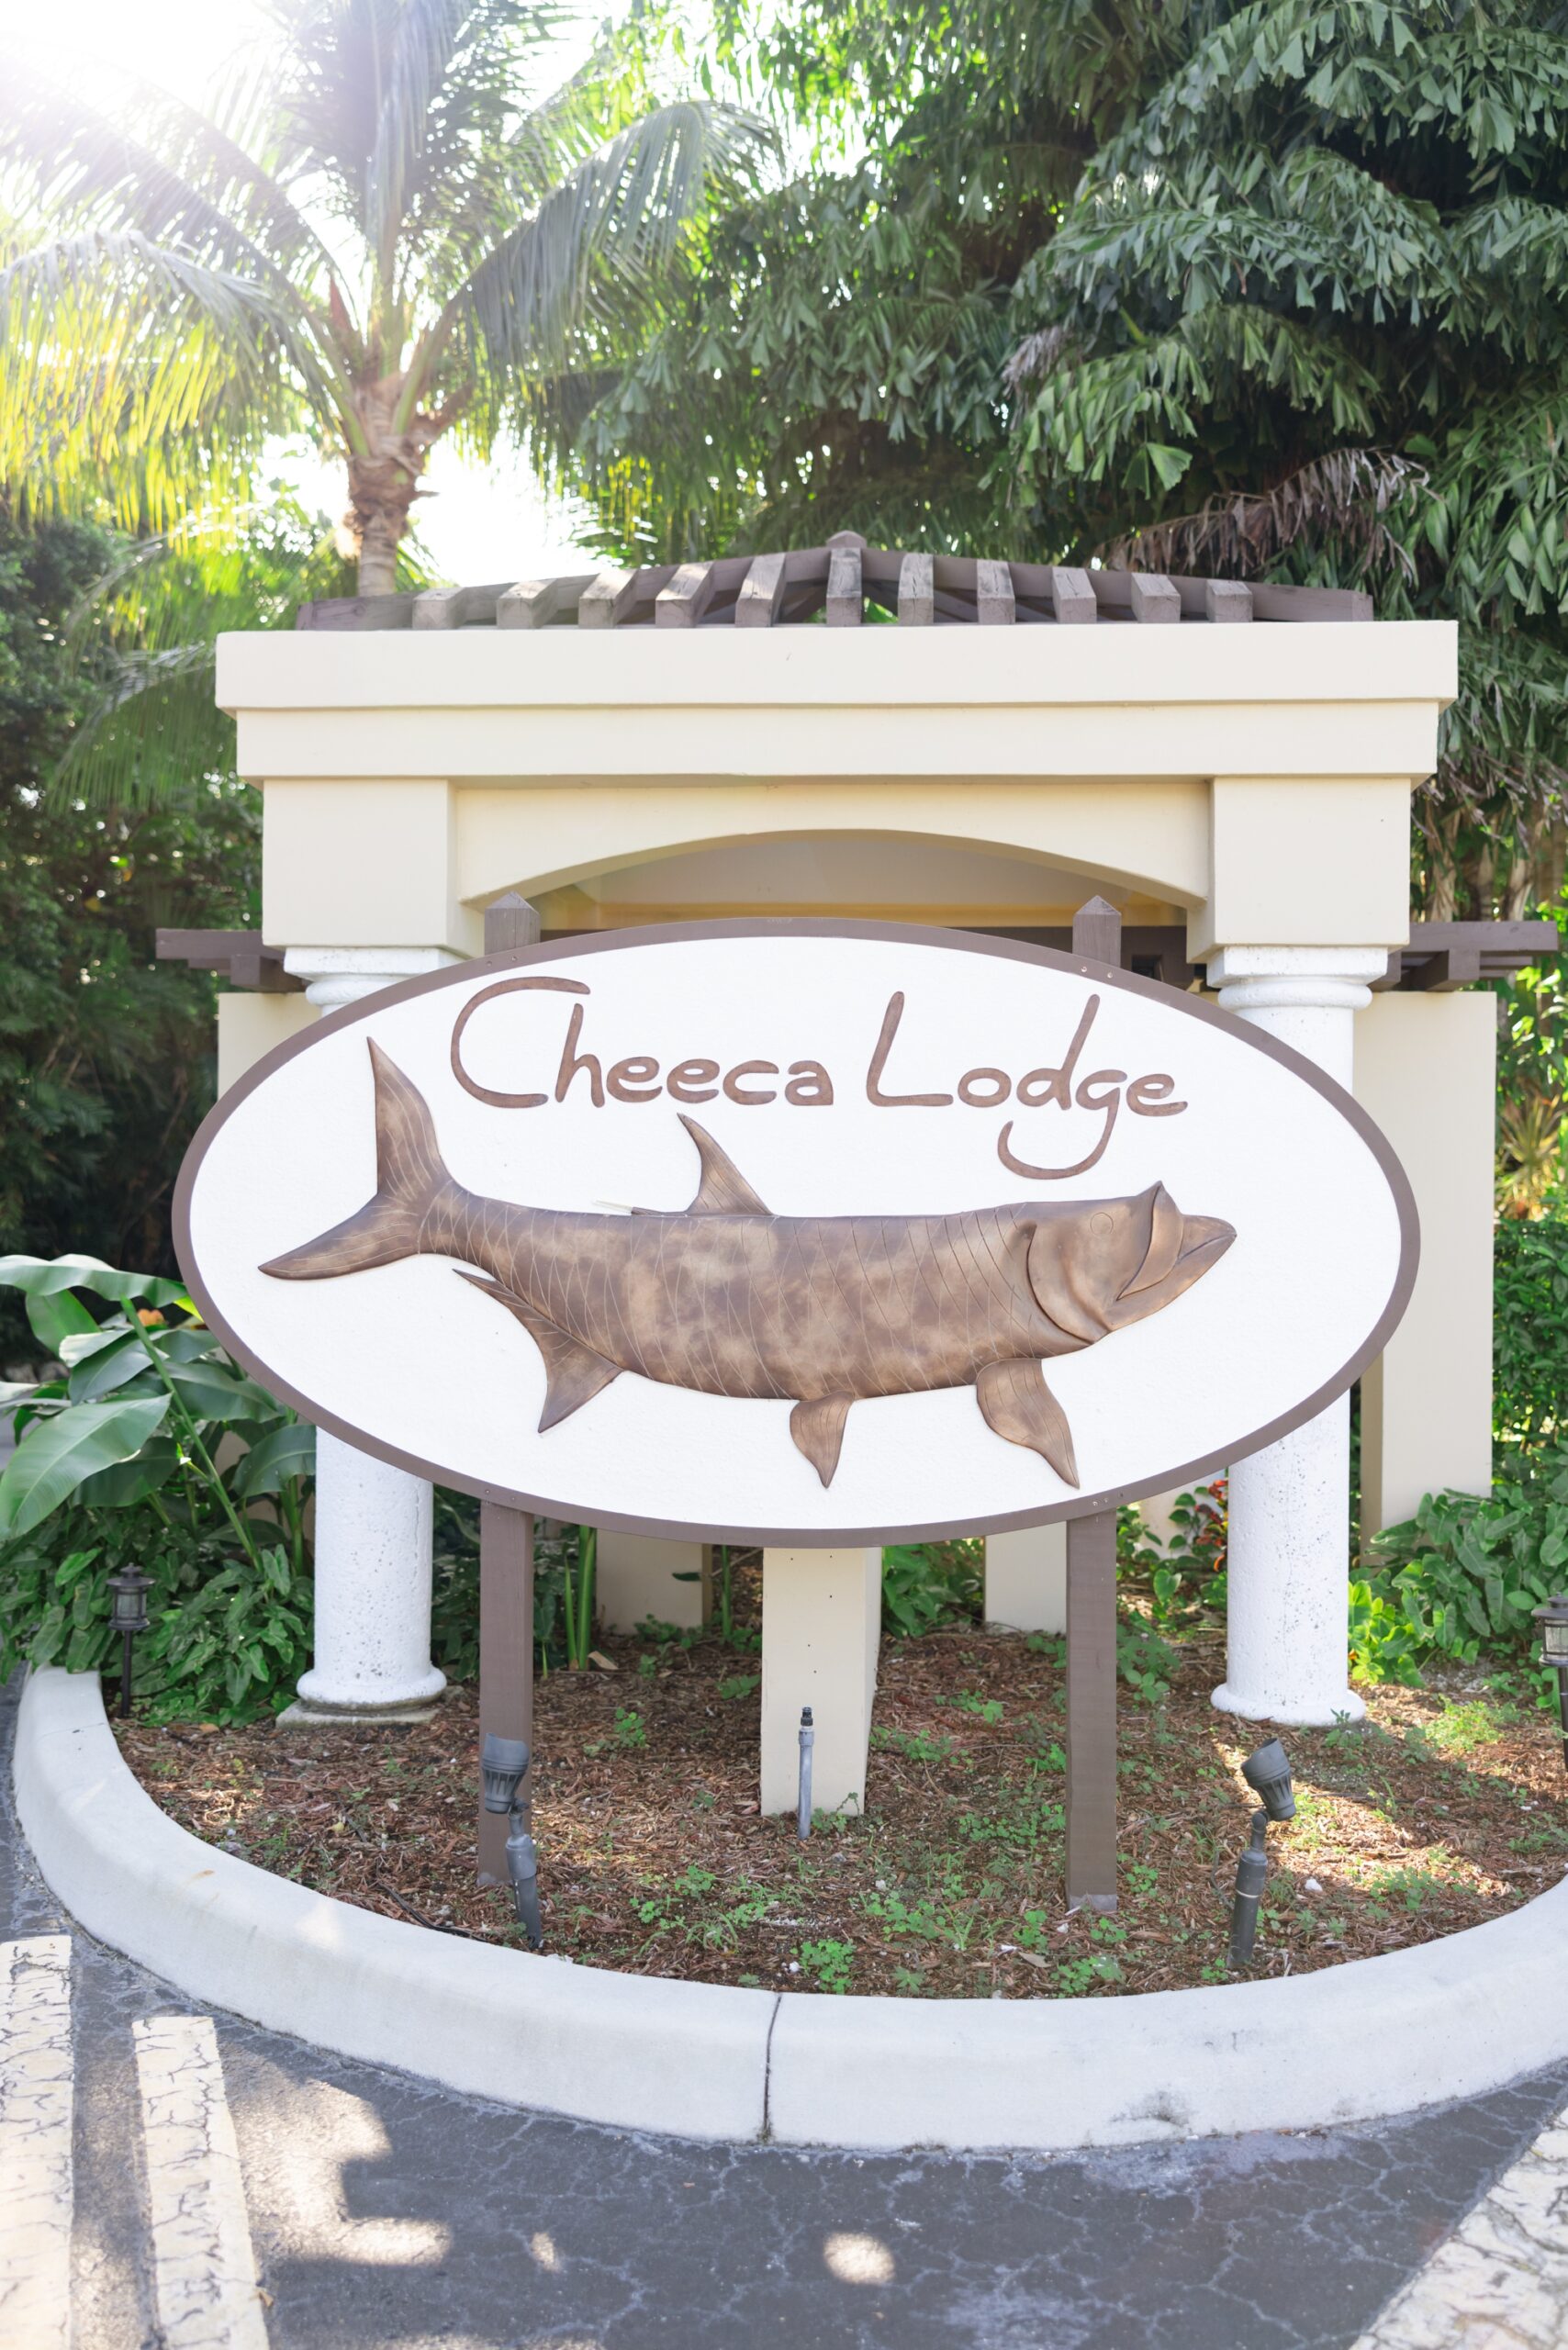 The entrance of Cheeca Lodge and Spa